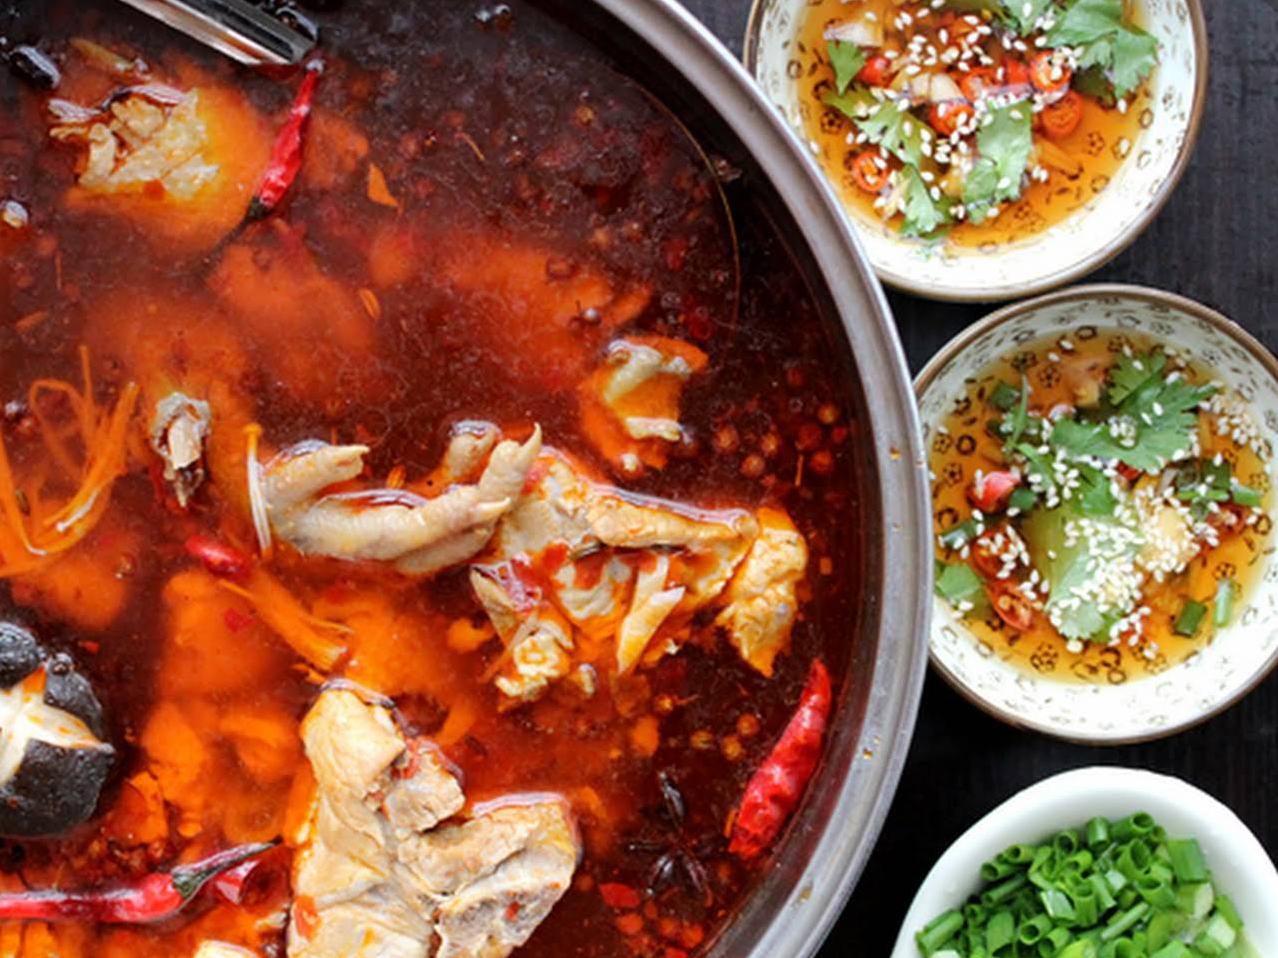  Gloomy day? Feeling under the weather? Hot pot is the answer.